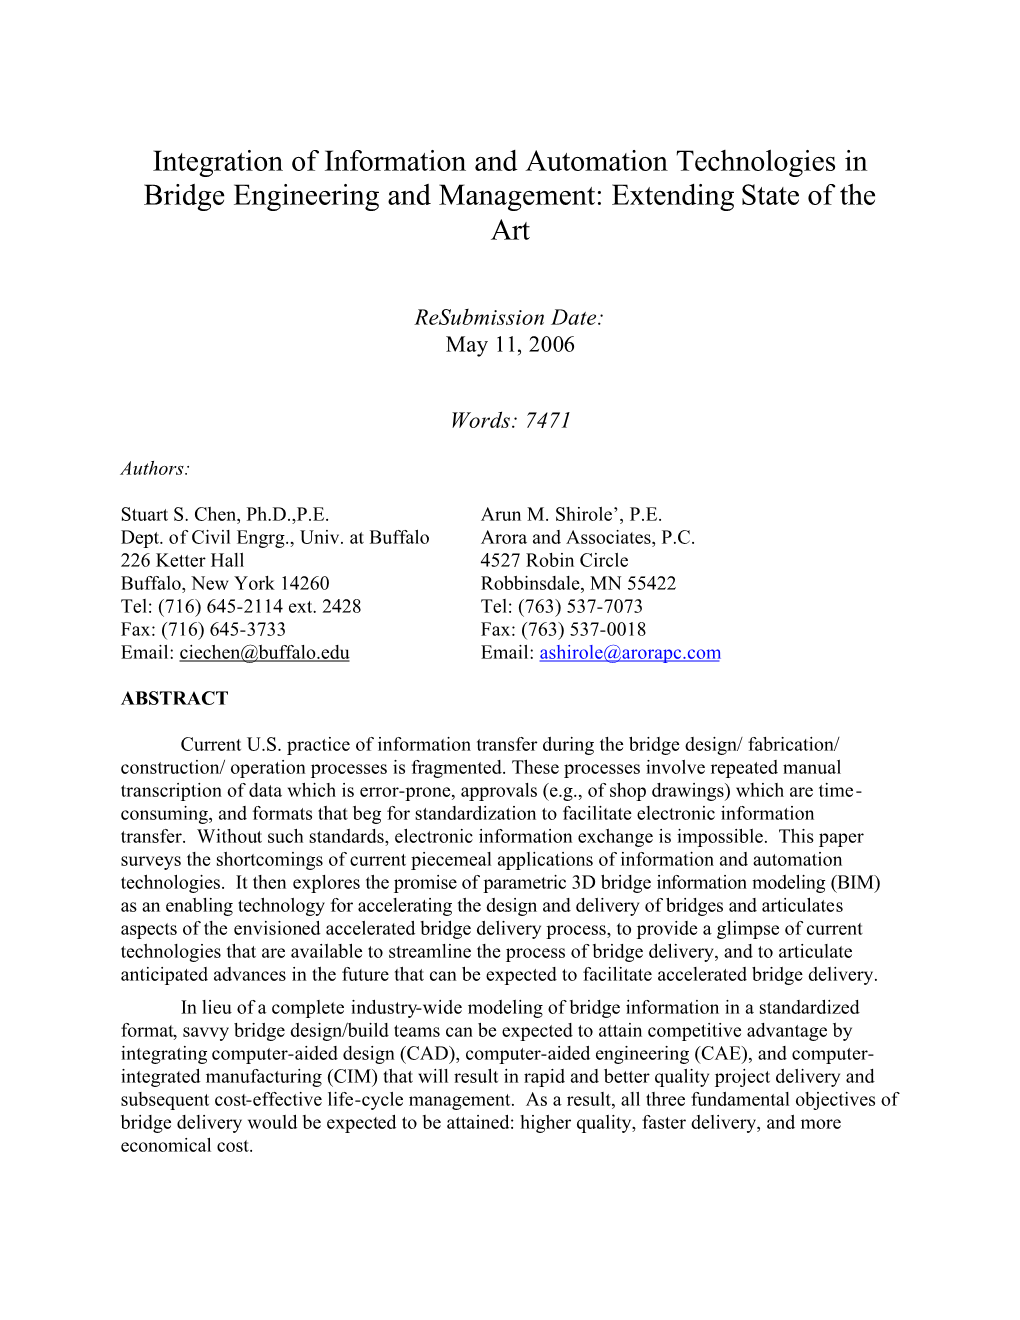 Integration of Information and Automation Technologies in Bridge Engineering and Management: Extending State of the Art